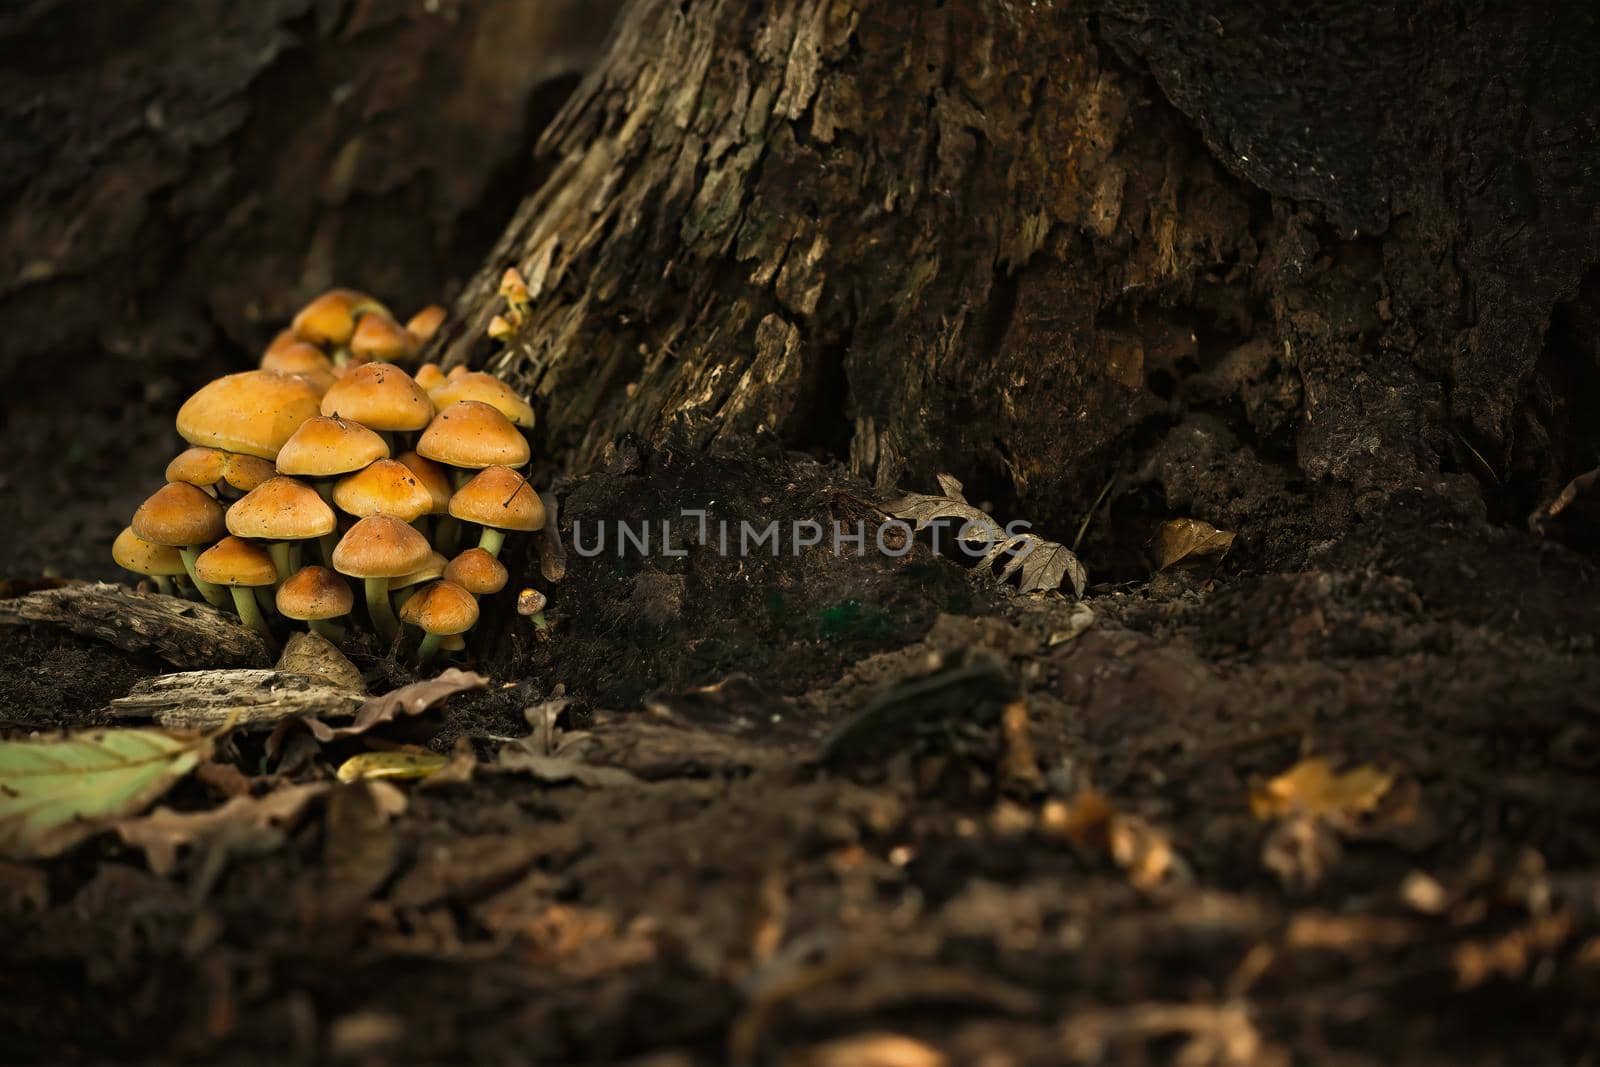 Inedible mushrooms in the forest near the trunk of an old dead tree by clusterx